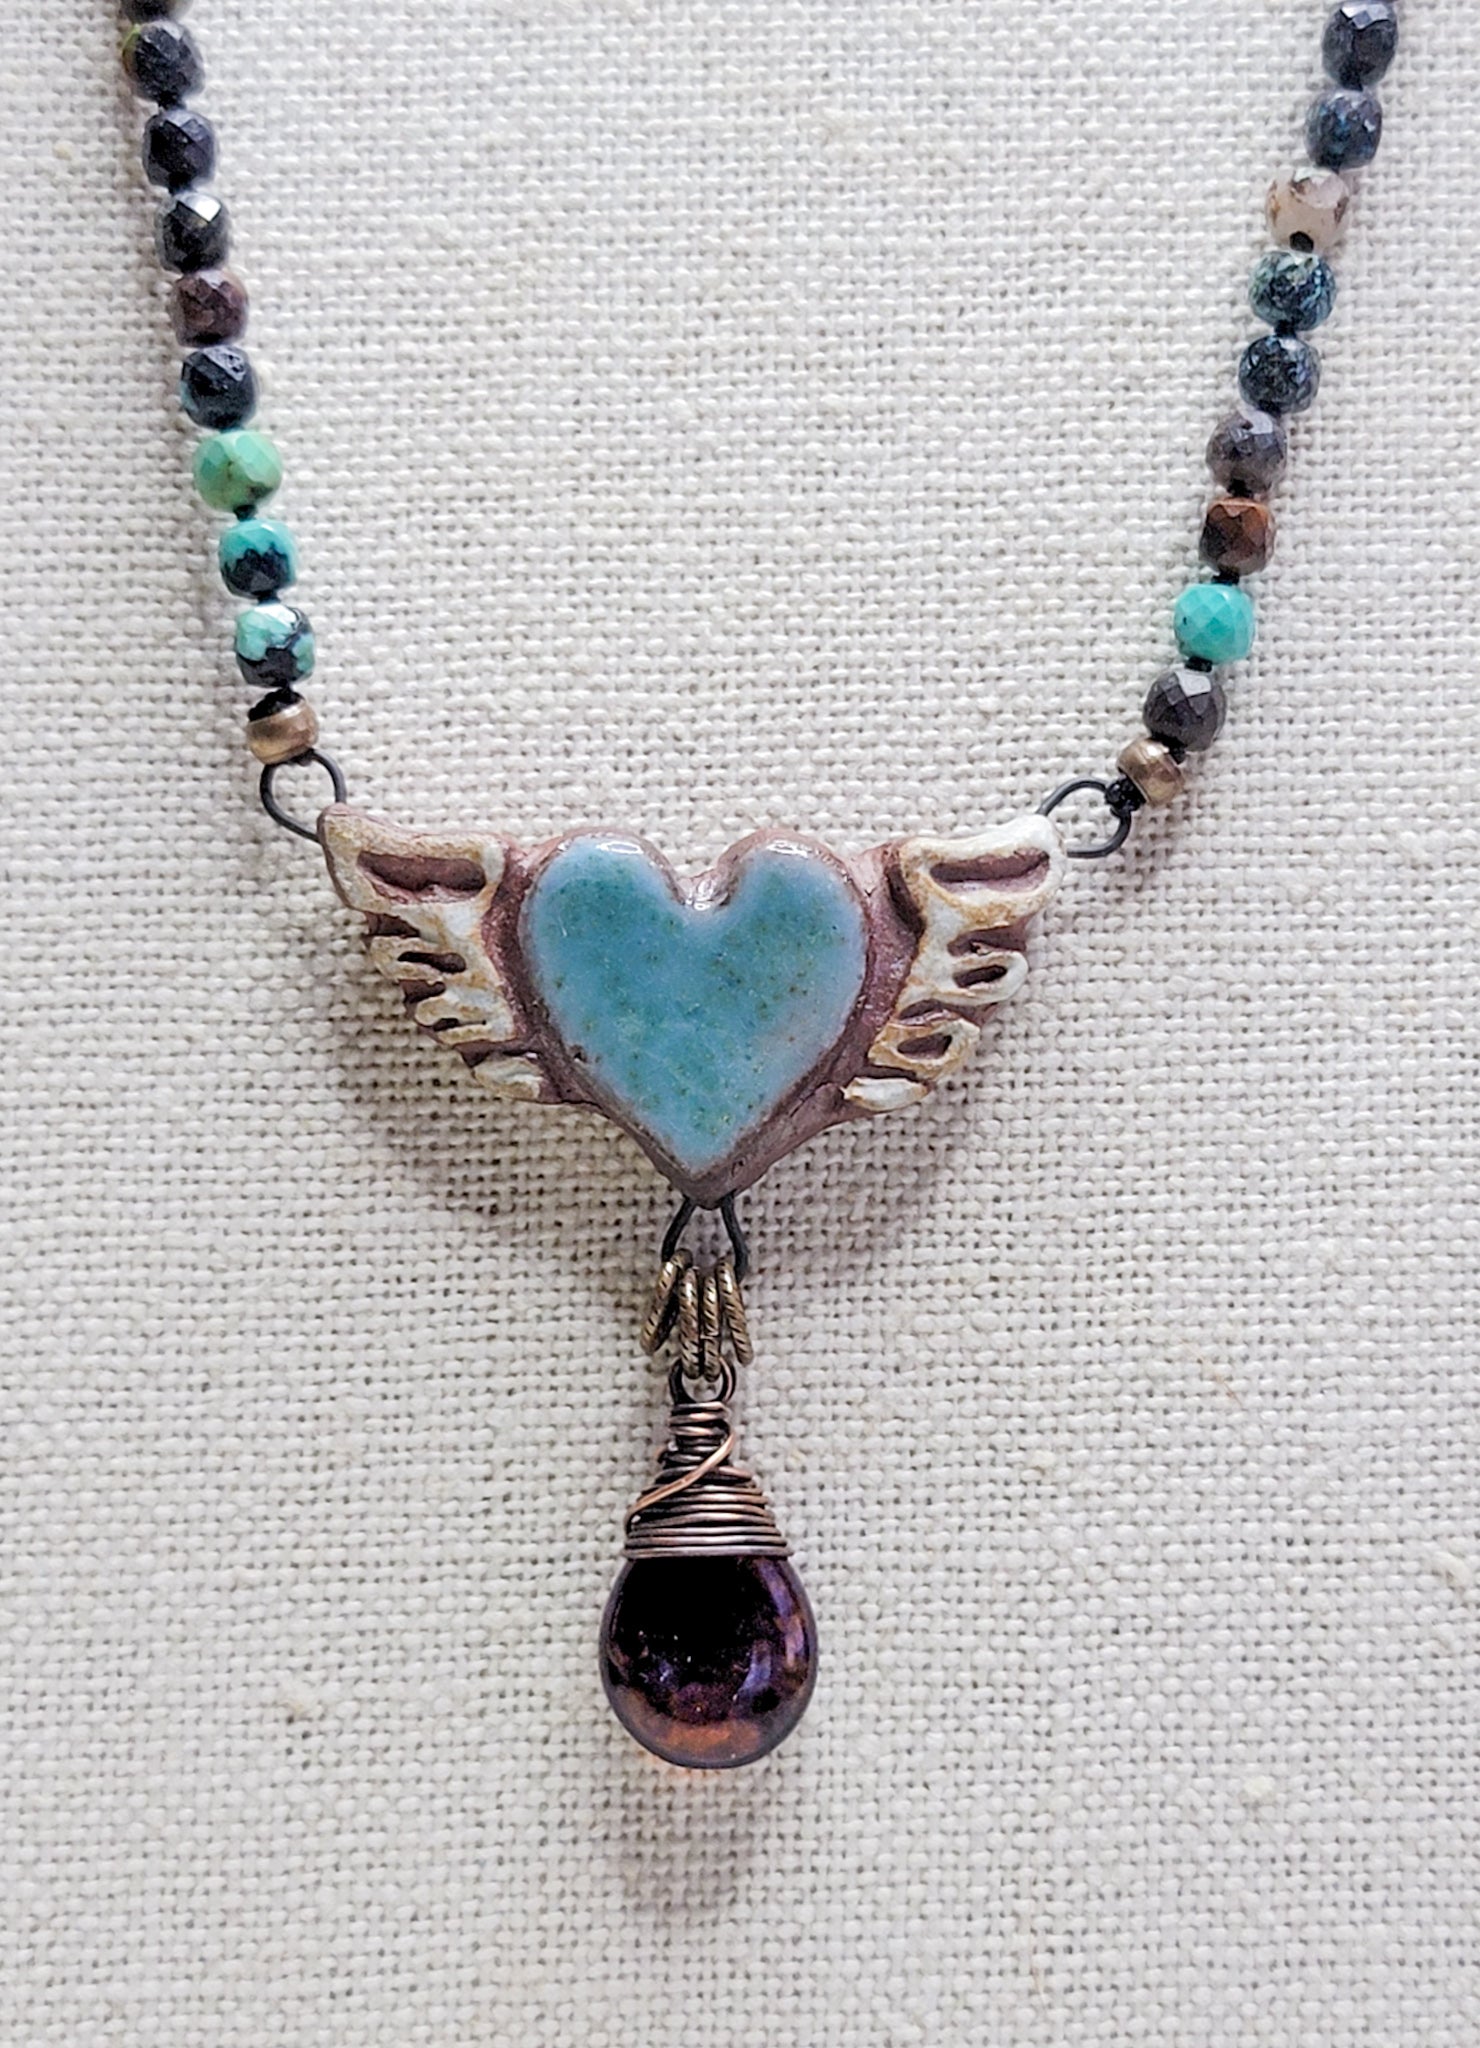 Knotted Turquoise Gemstone Necklace, Nicki Lynn Jewelry 